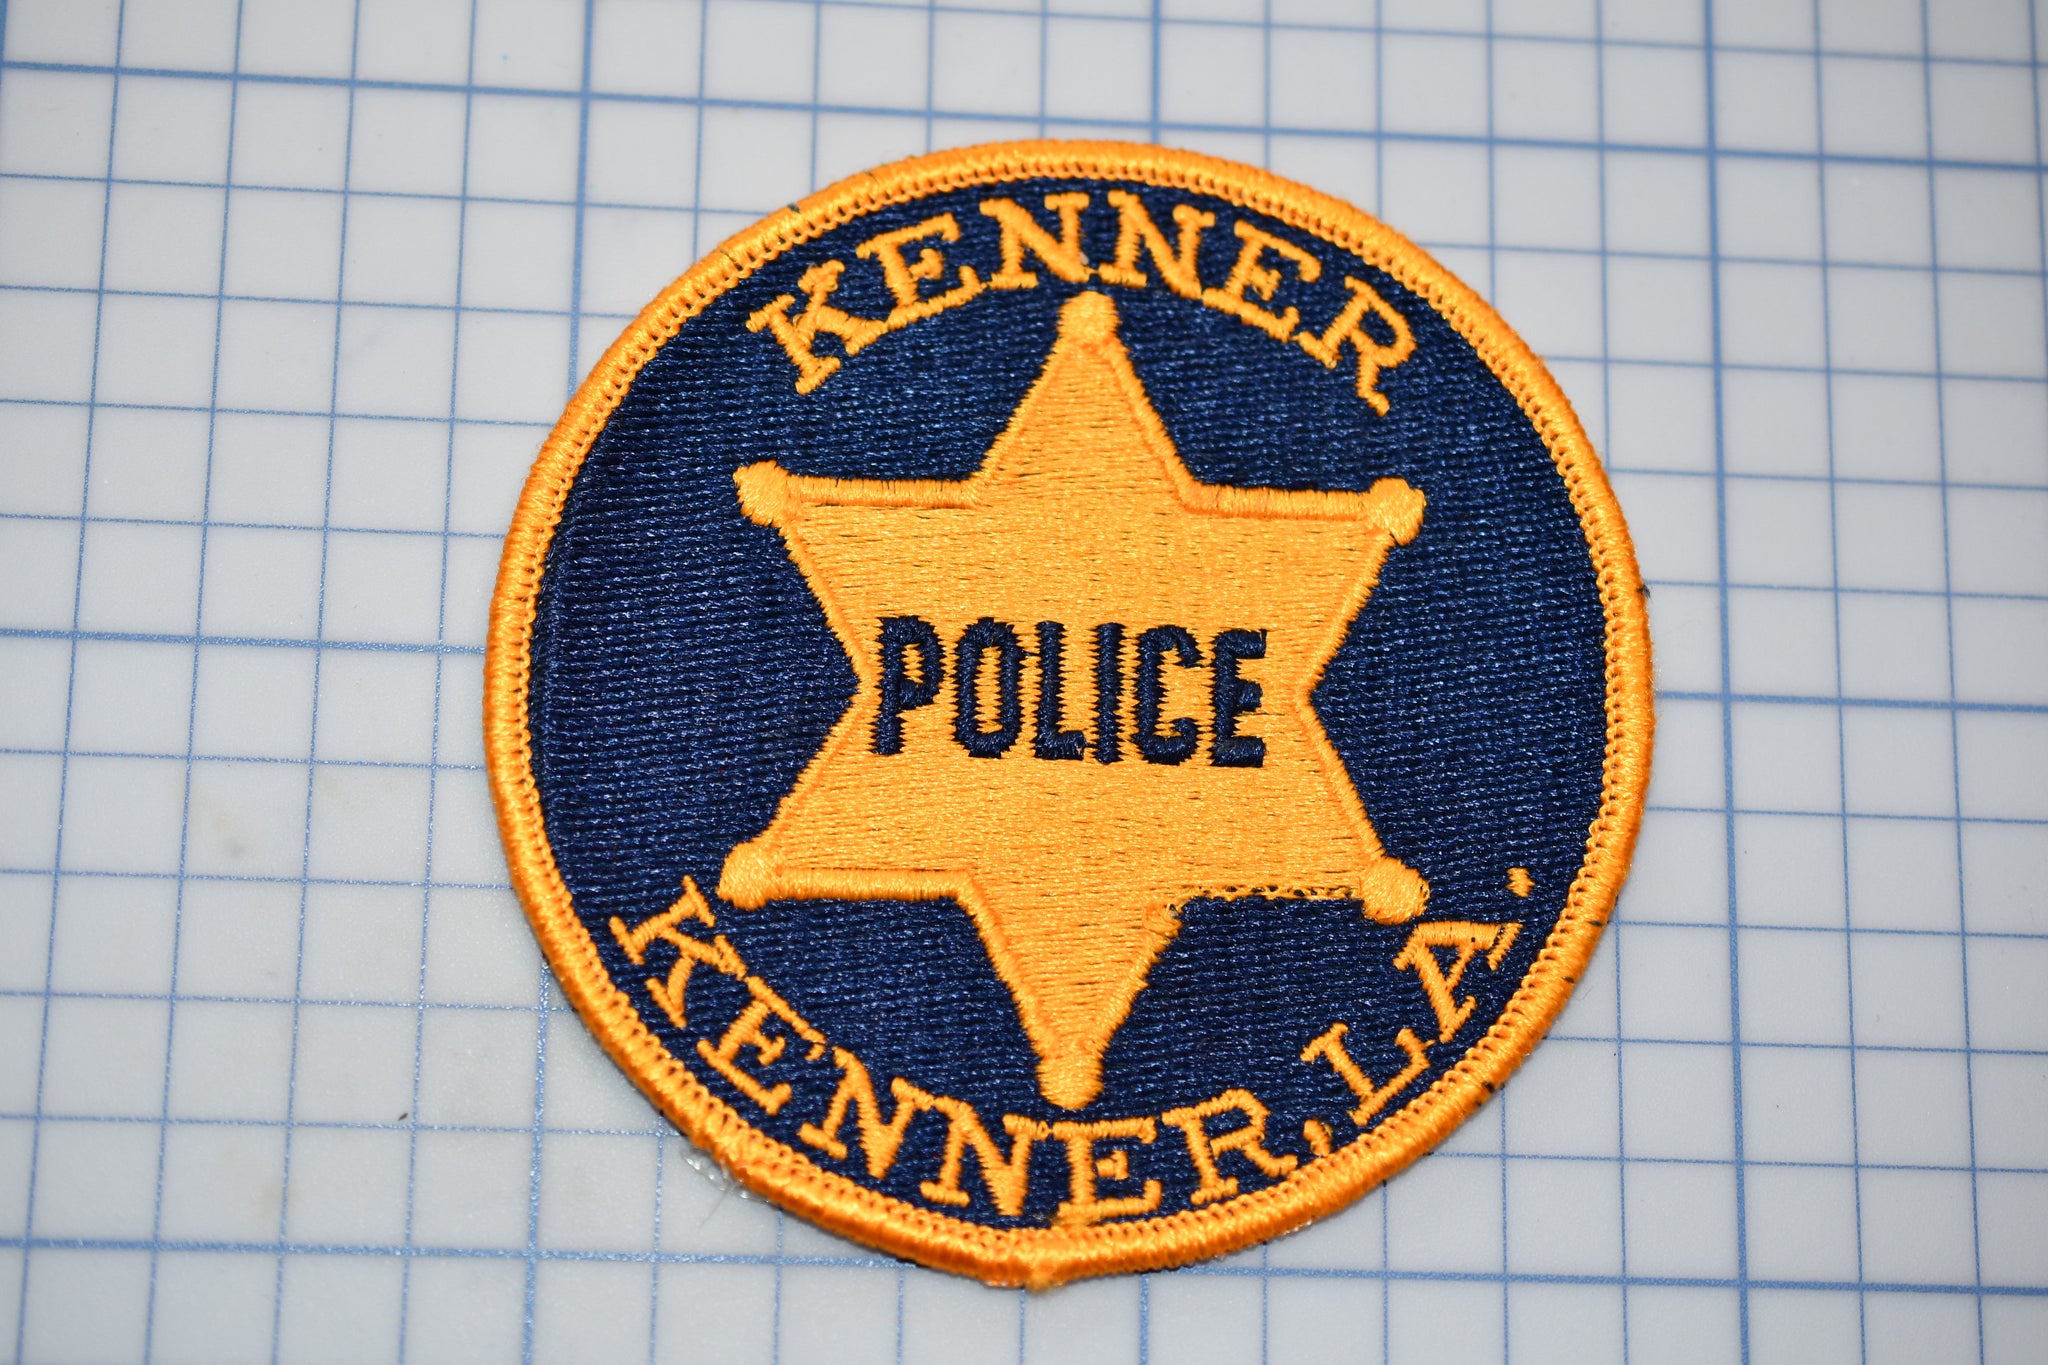 Kenner Louisiana Police Patch (B29-340)